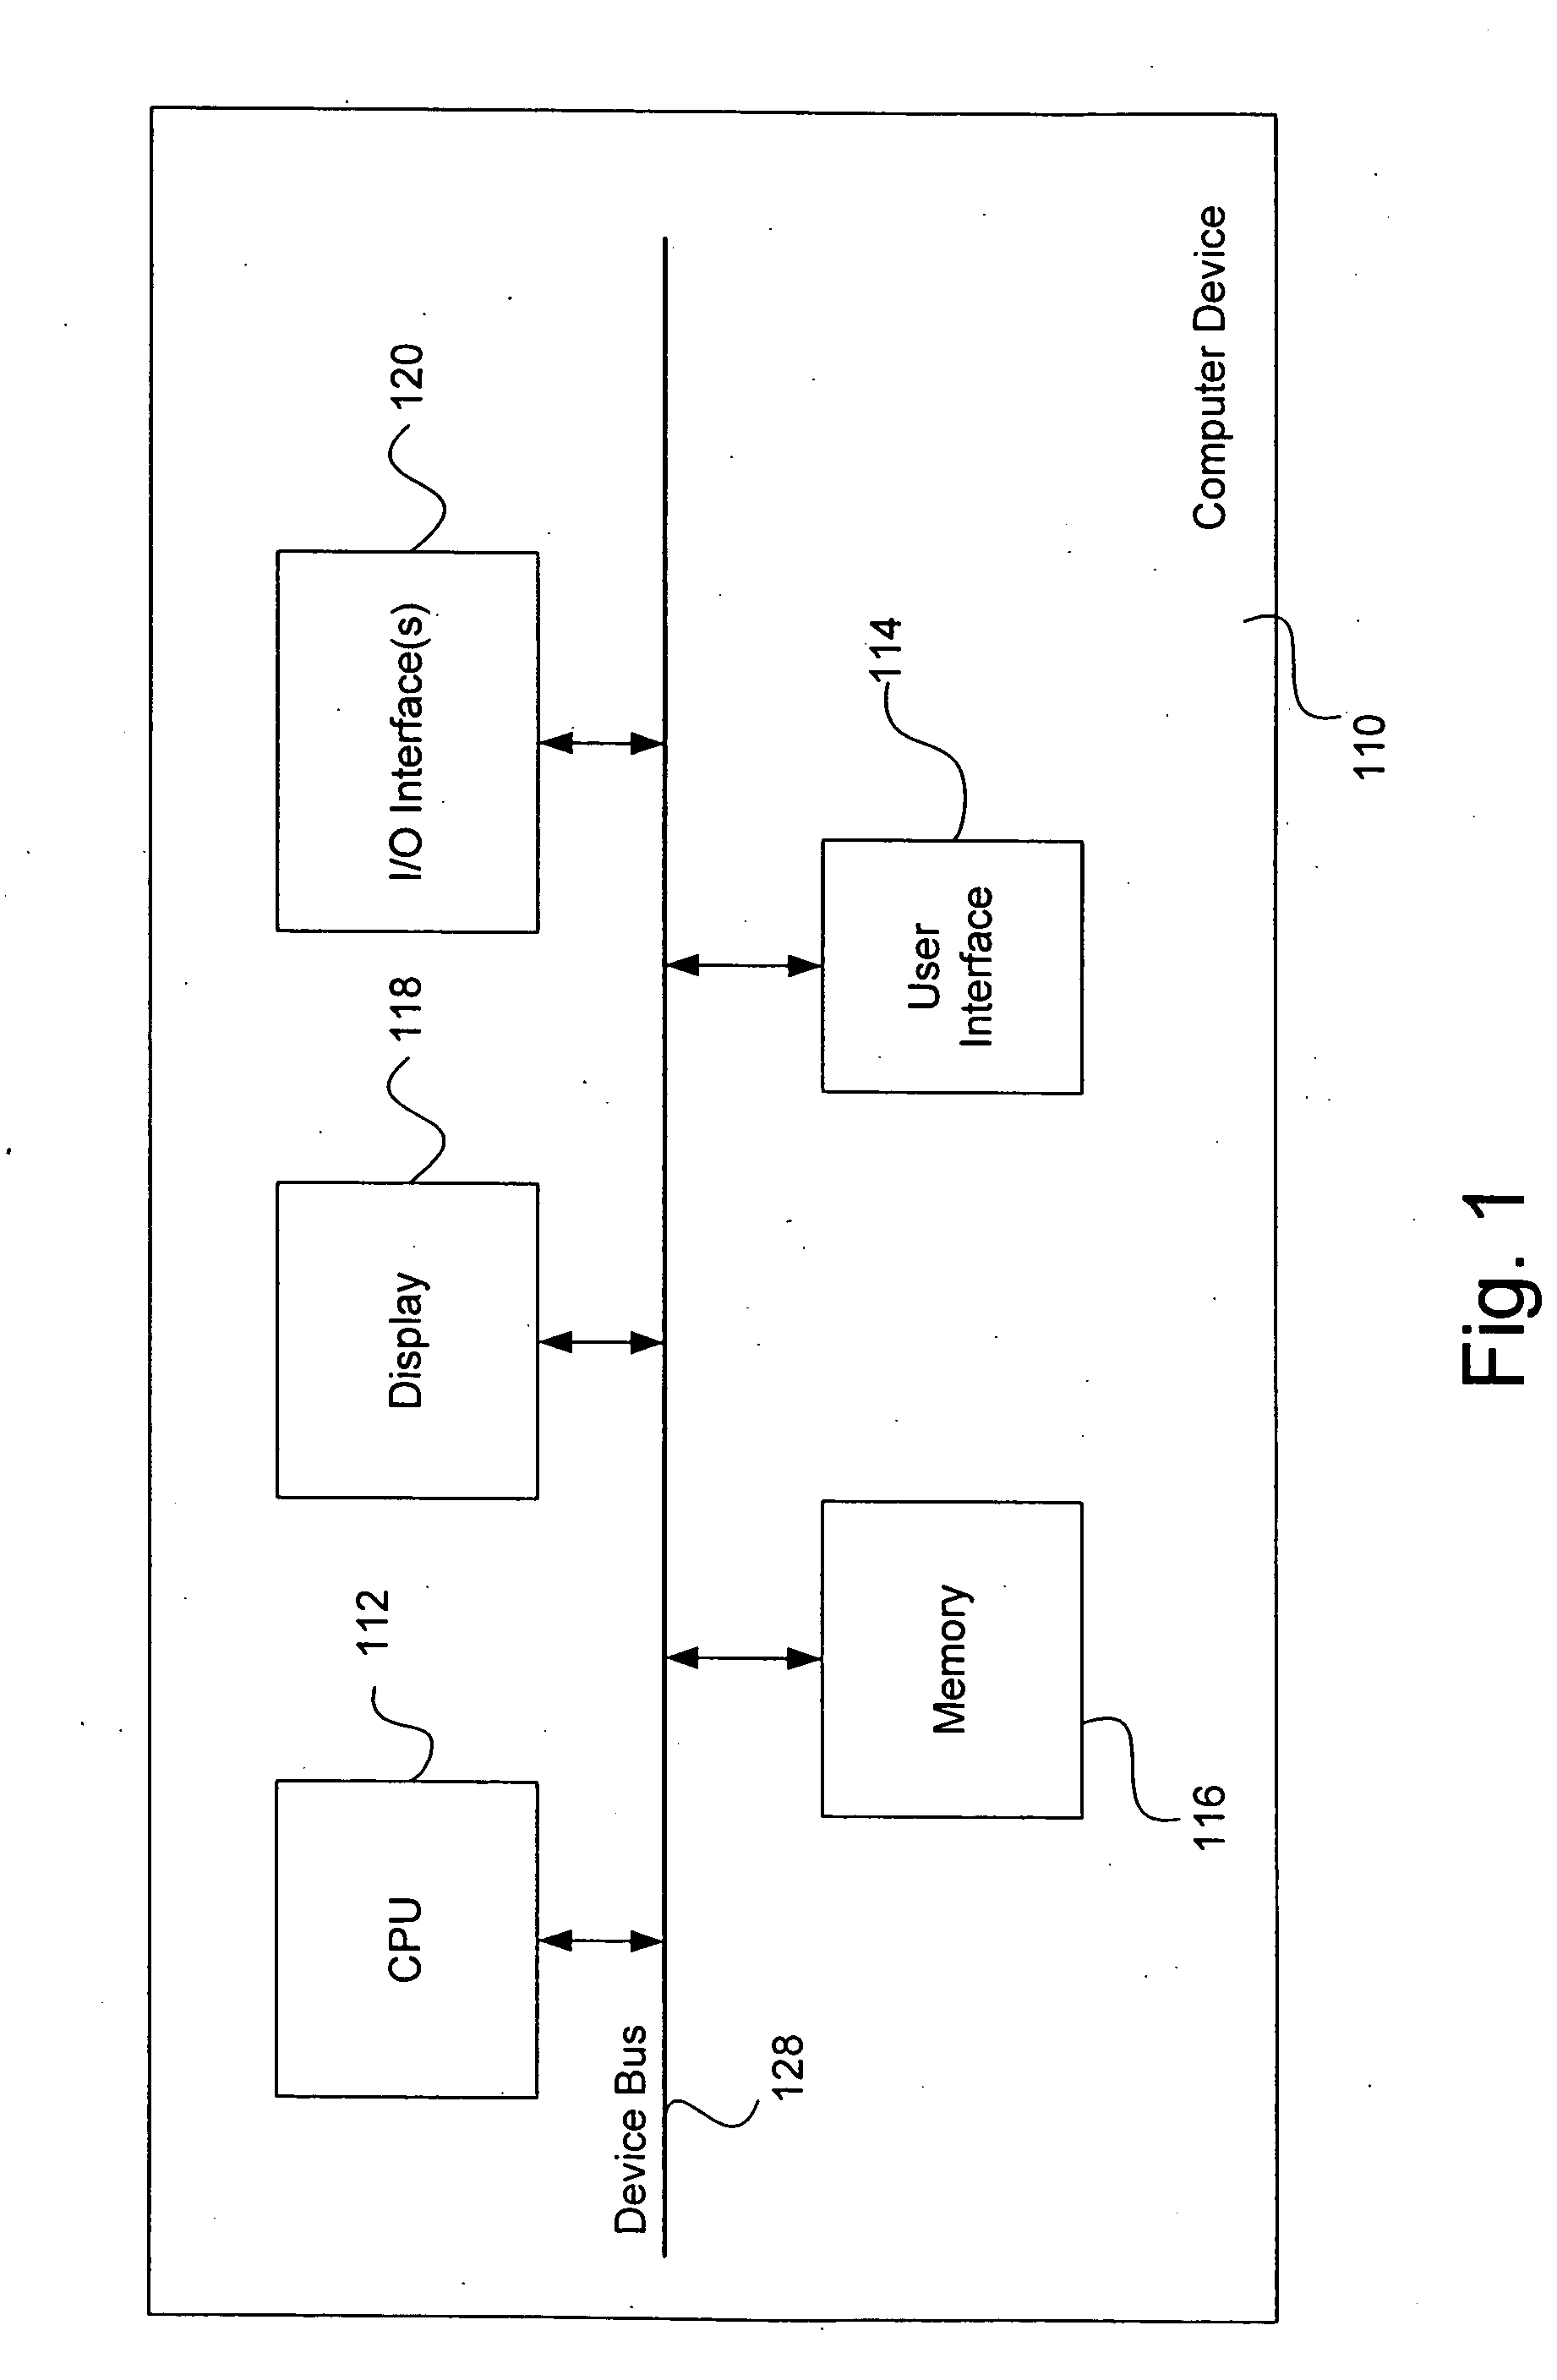 System and method for utilizing a graphic equalizer in performing image search procedures